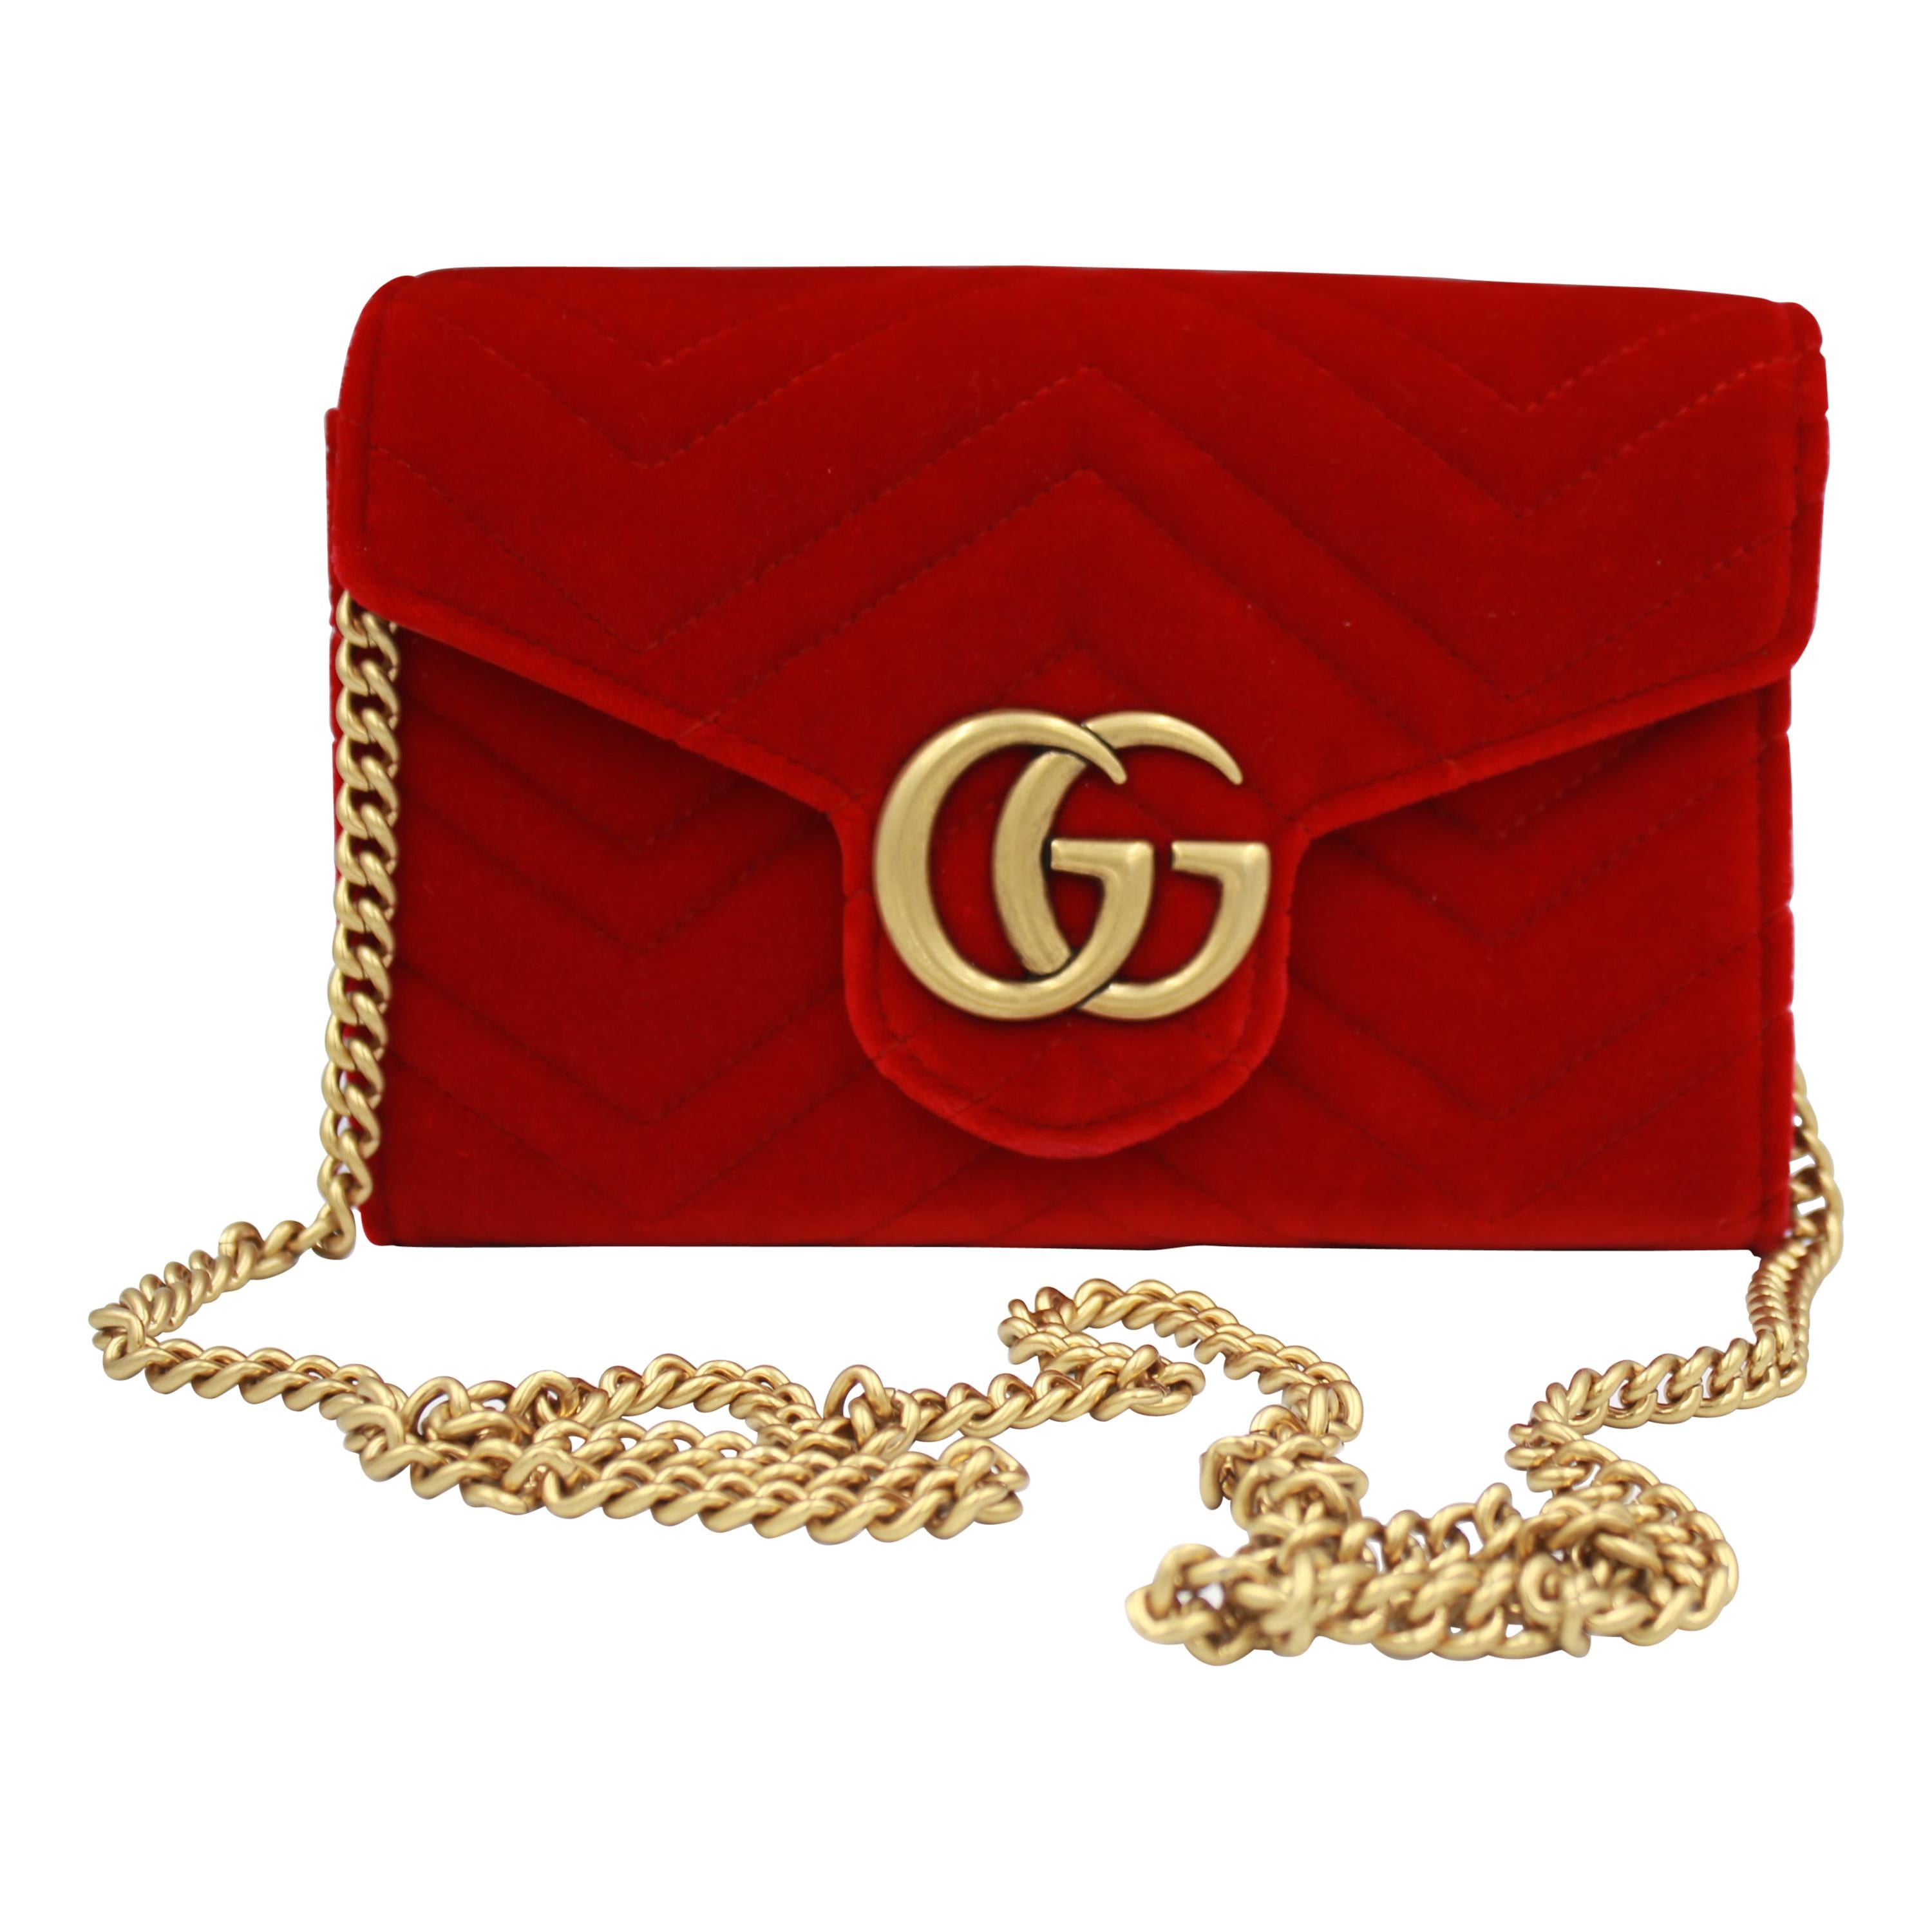 Gucci Marmont GG wallet on chain in red velvet For Sale